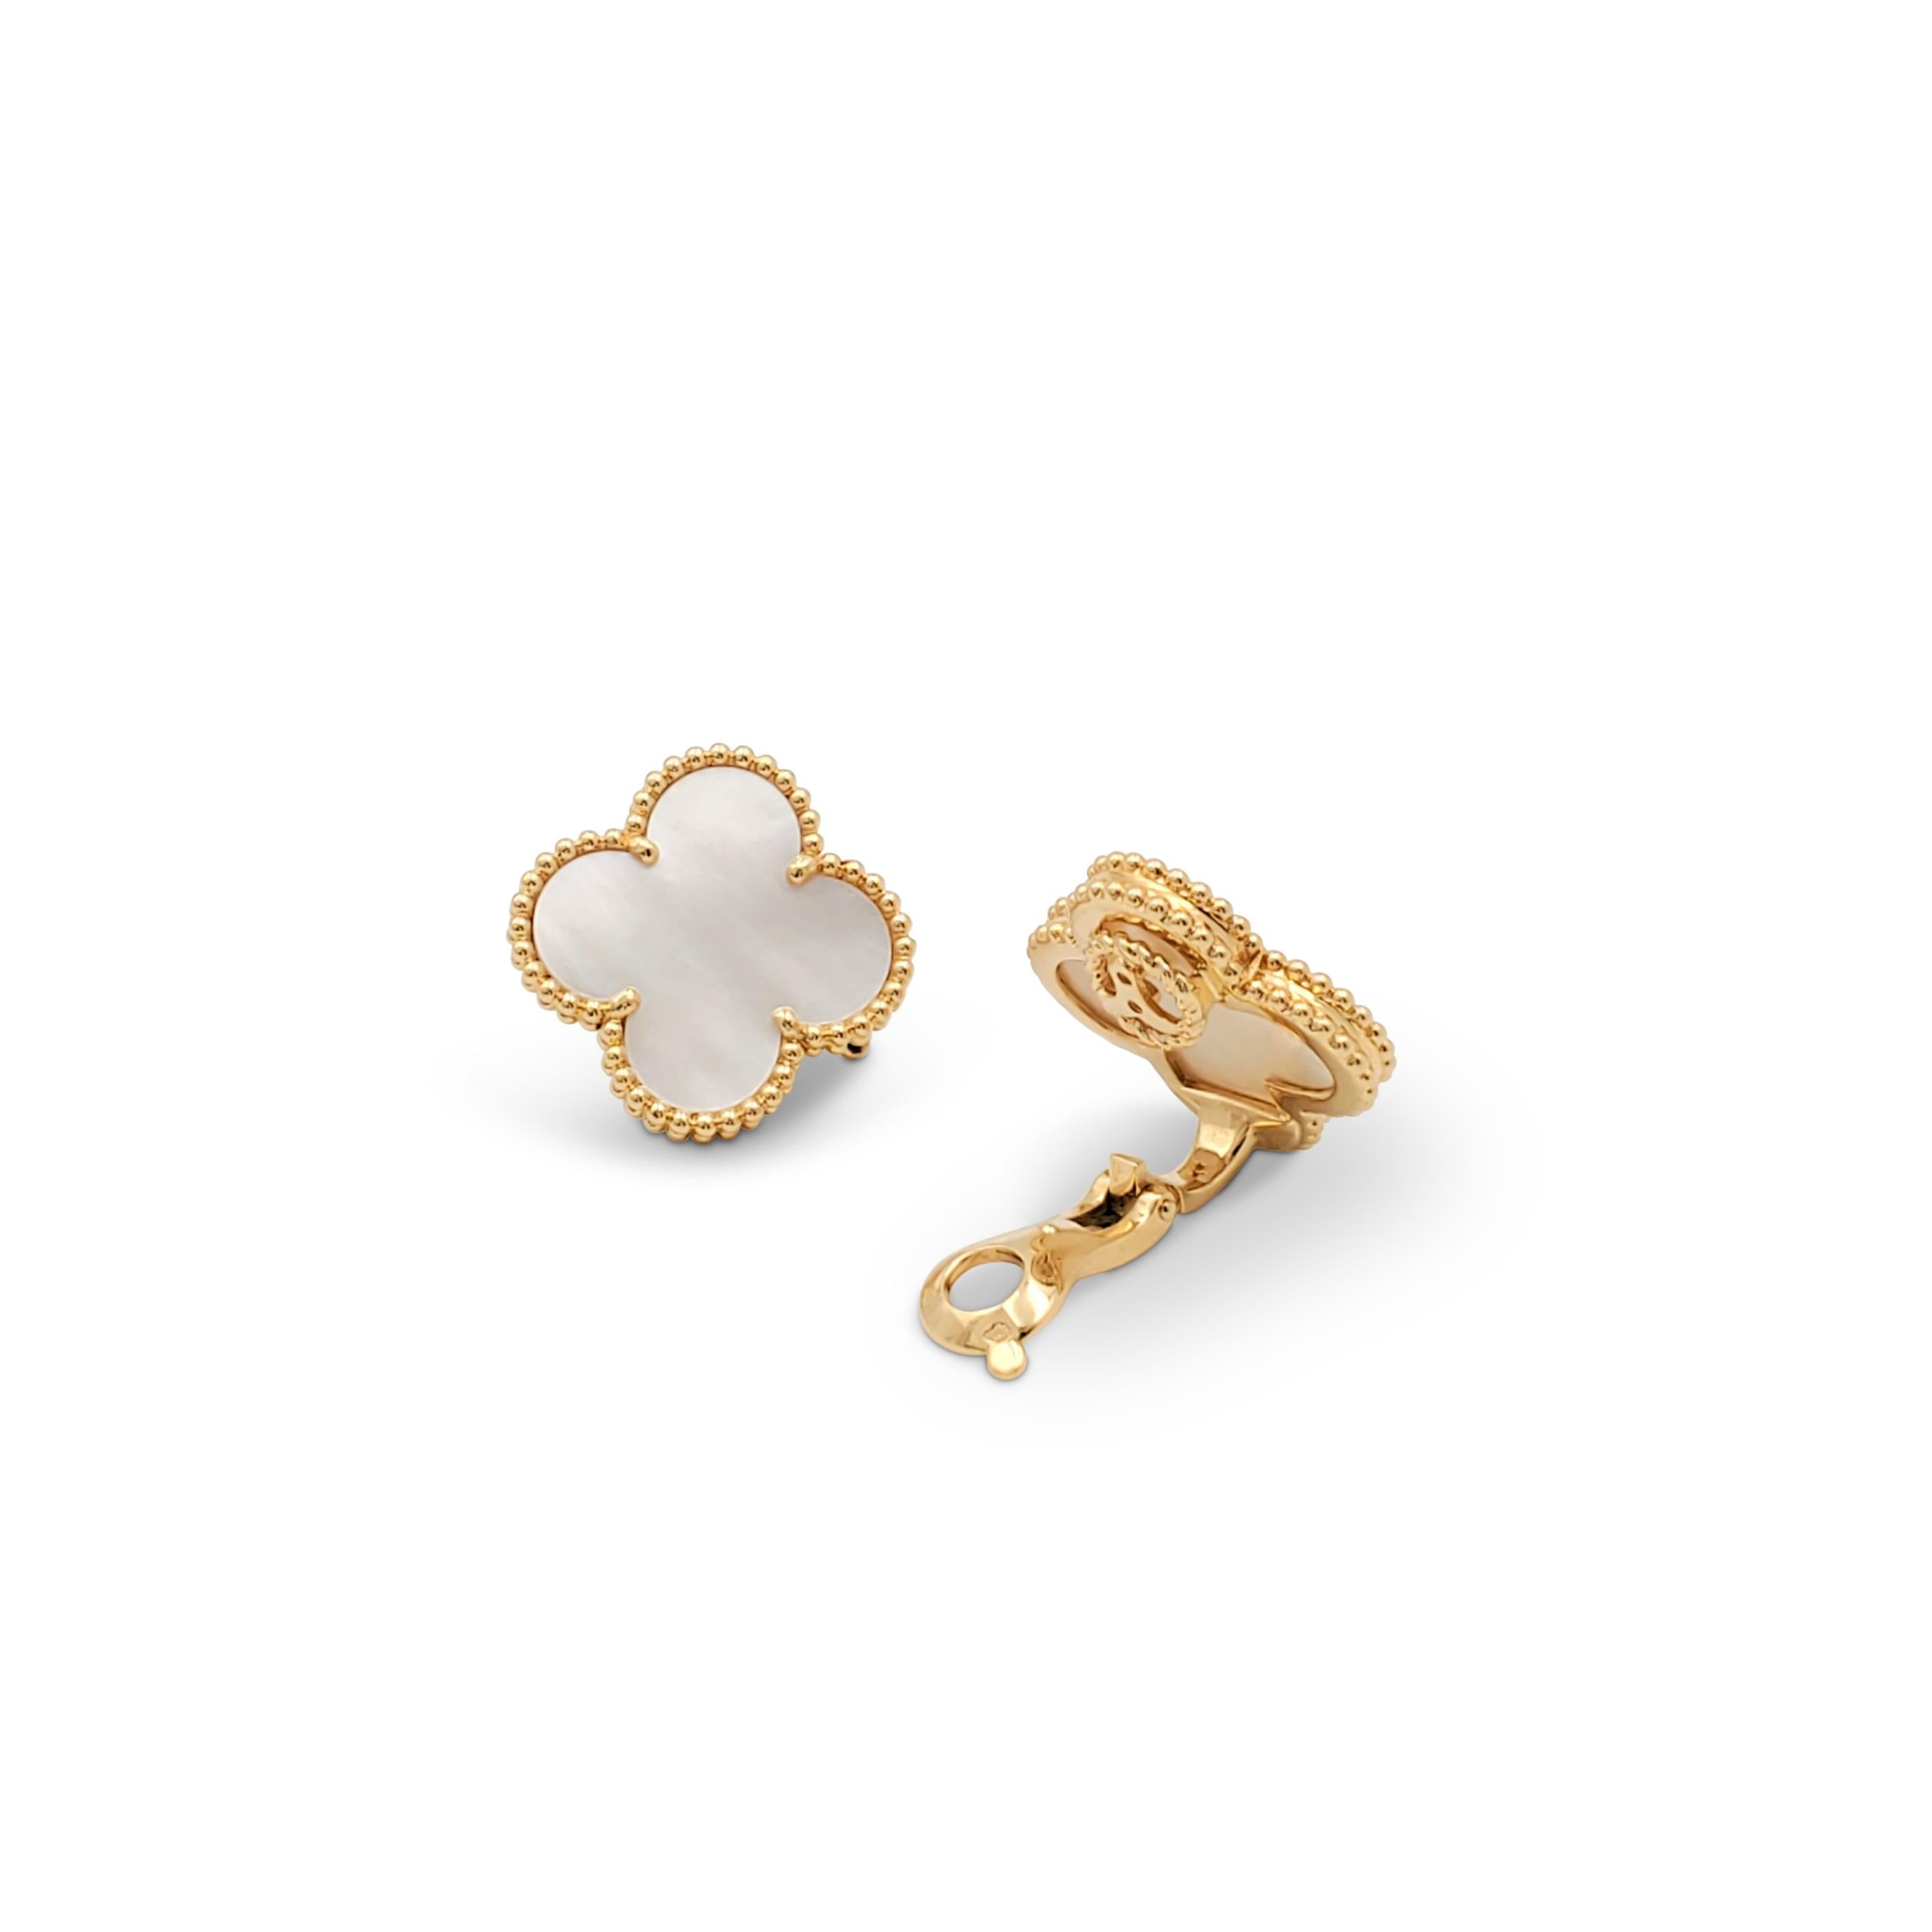 Authentic Van Cleef & Arpels 'Magic Alhambra' earrings crafted in 18 karat yellow gold centering on the brand's iconic mother-of-pearl clover motif. Signed VCA, Au750, with serial number. Clip backs, without earring posts. The earrings are presented